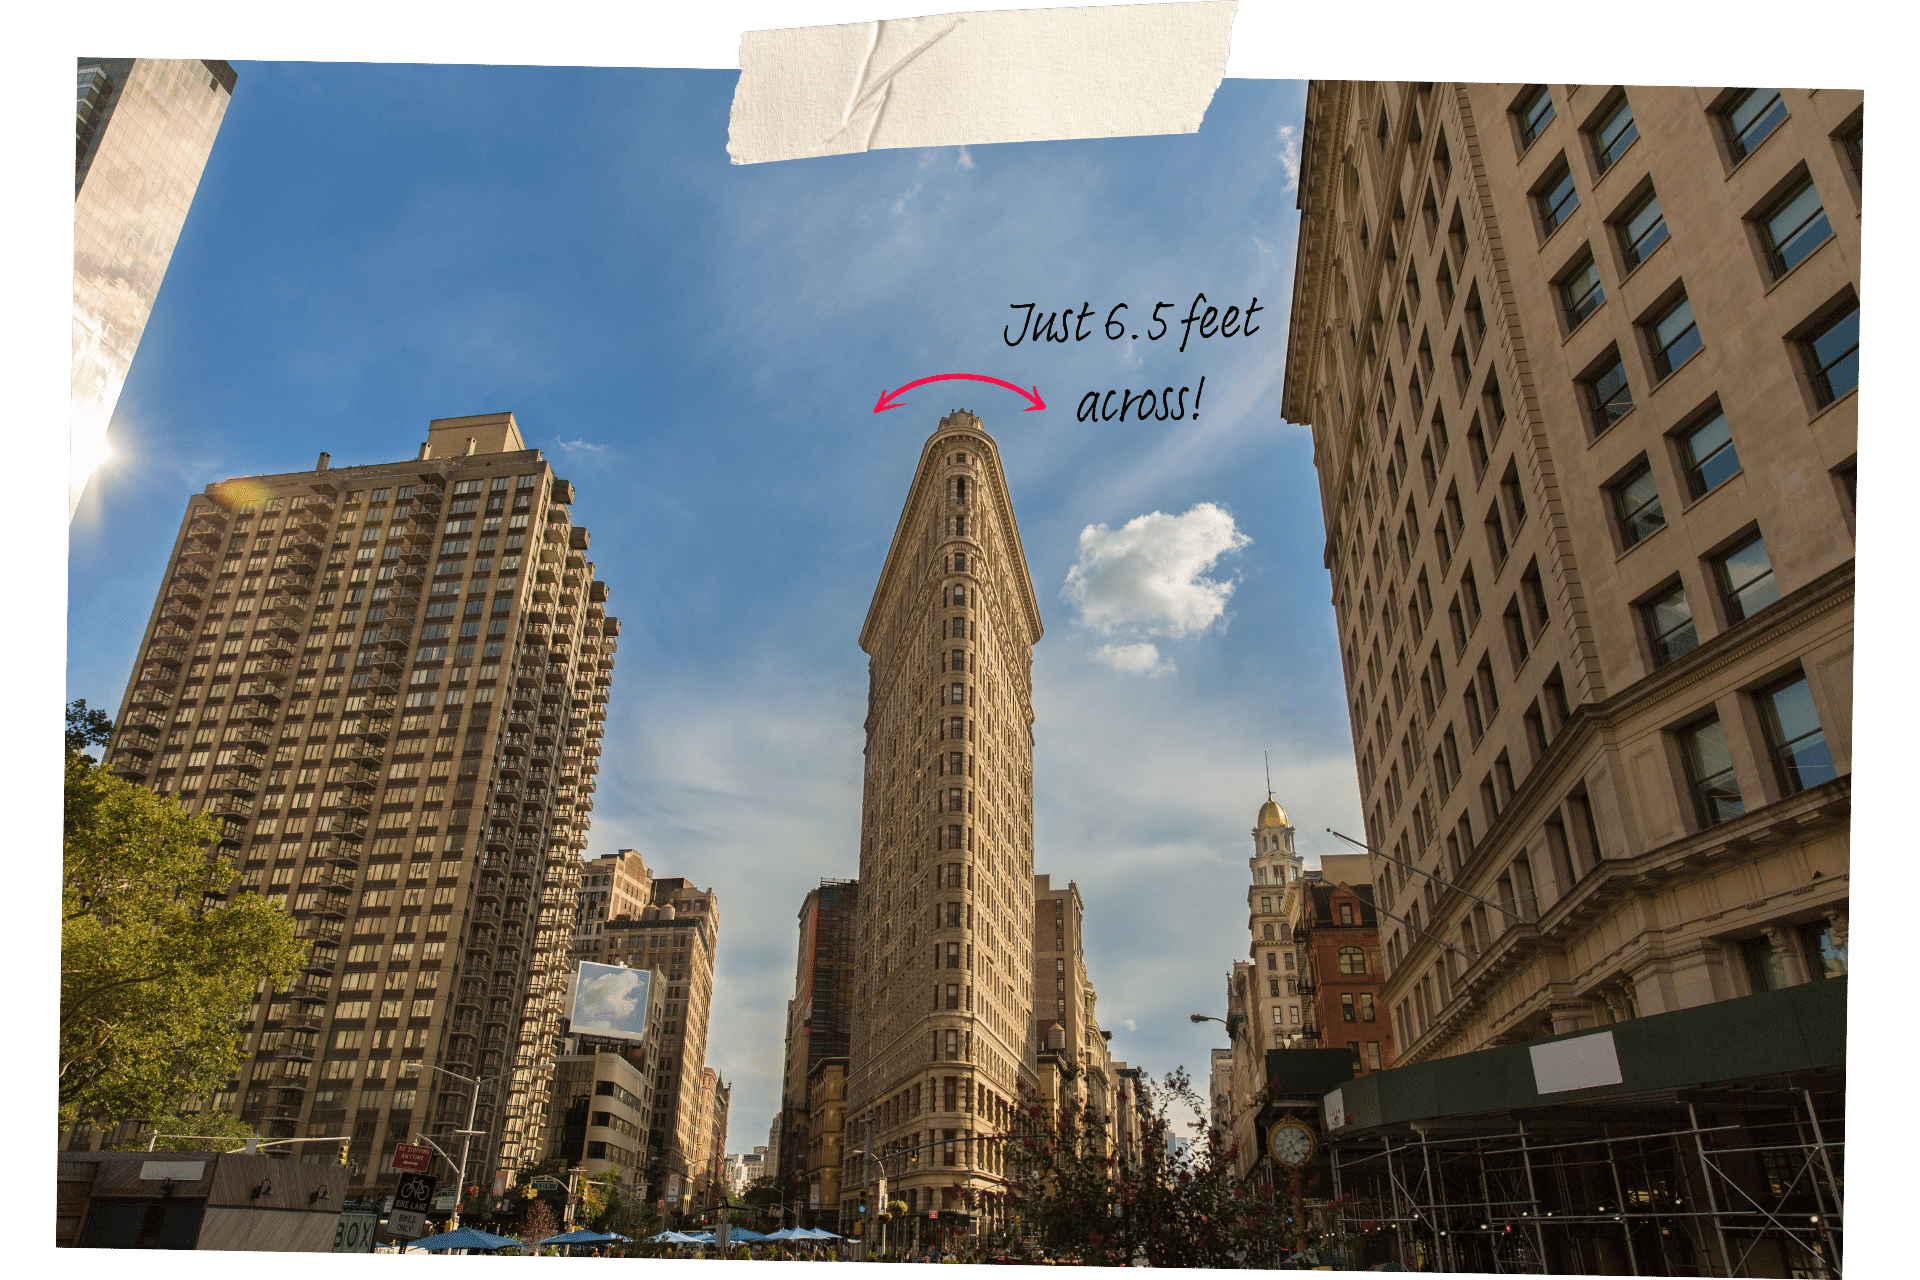 The Flat Iron Building is one of the must-visit historic sites in NYC. Image shows the narrow front facade of the Flat Iron Building from ground level, mid-rise building on either side of it.